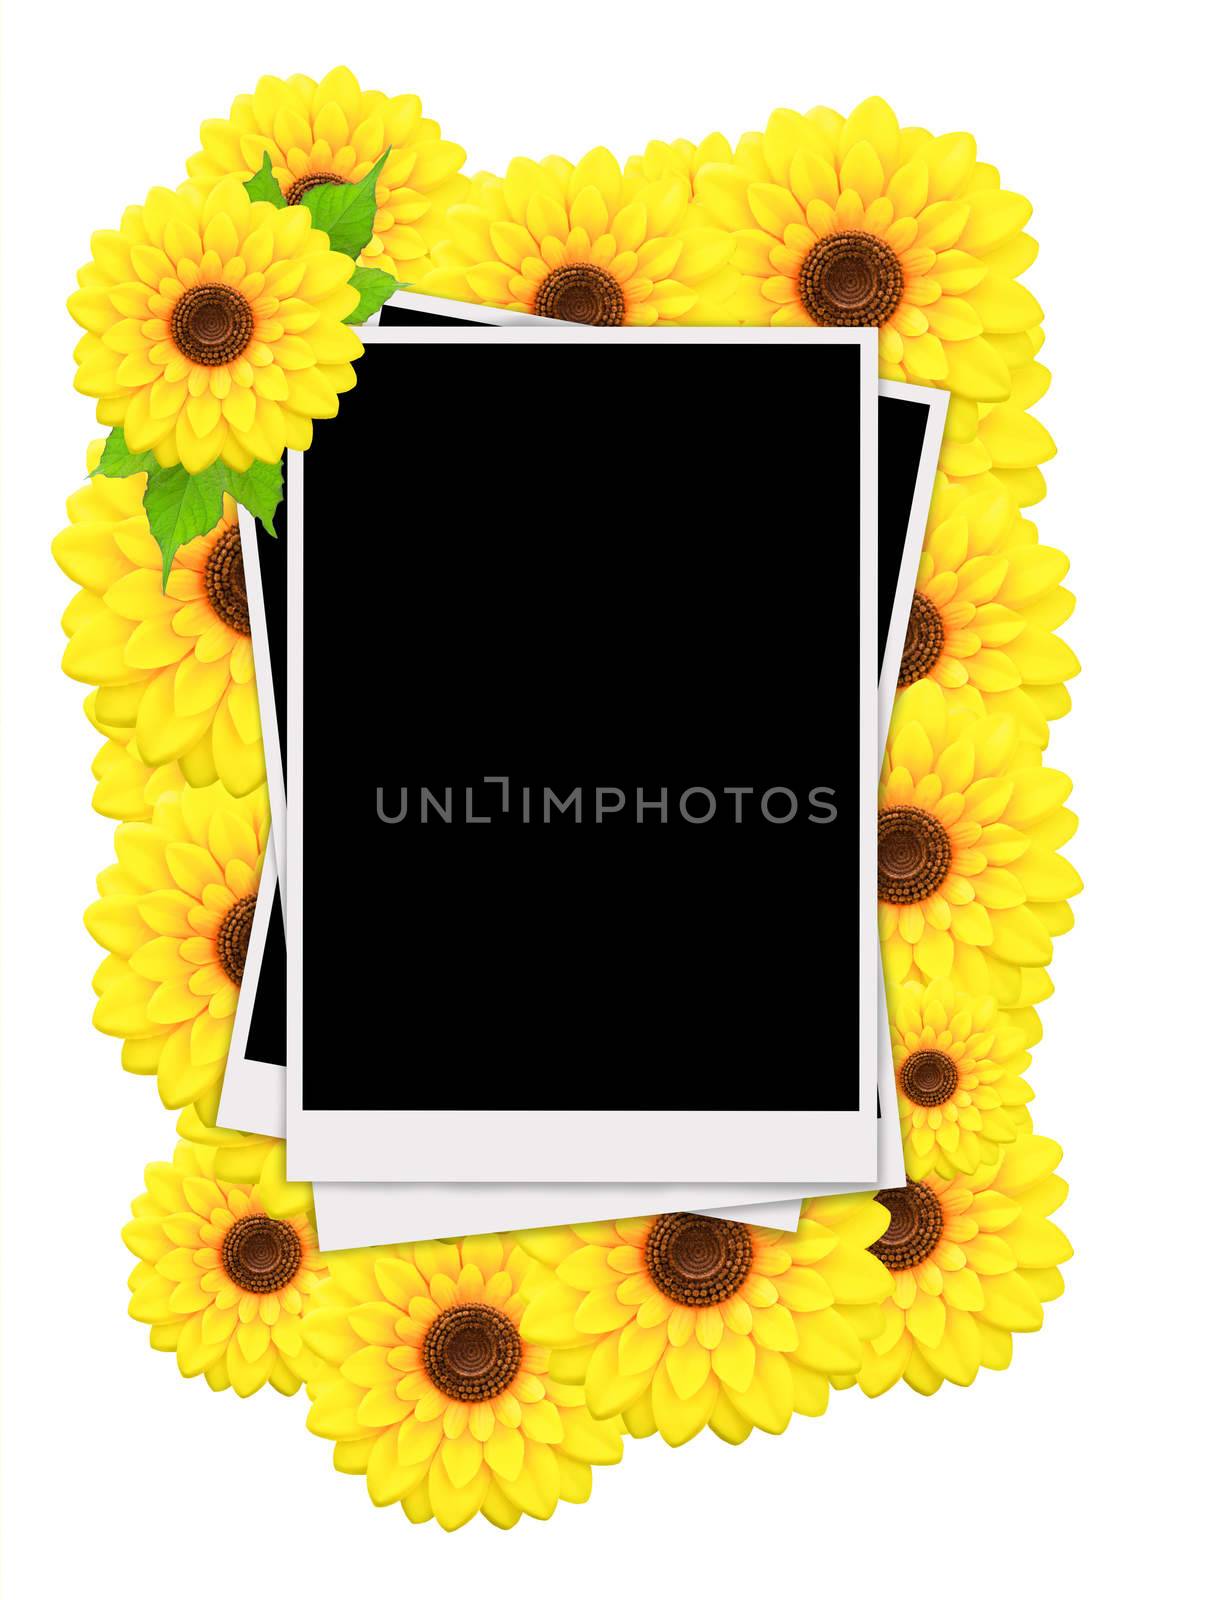 Empty instant photos and sunflowers by Gamjai